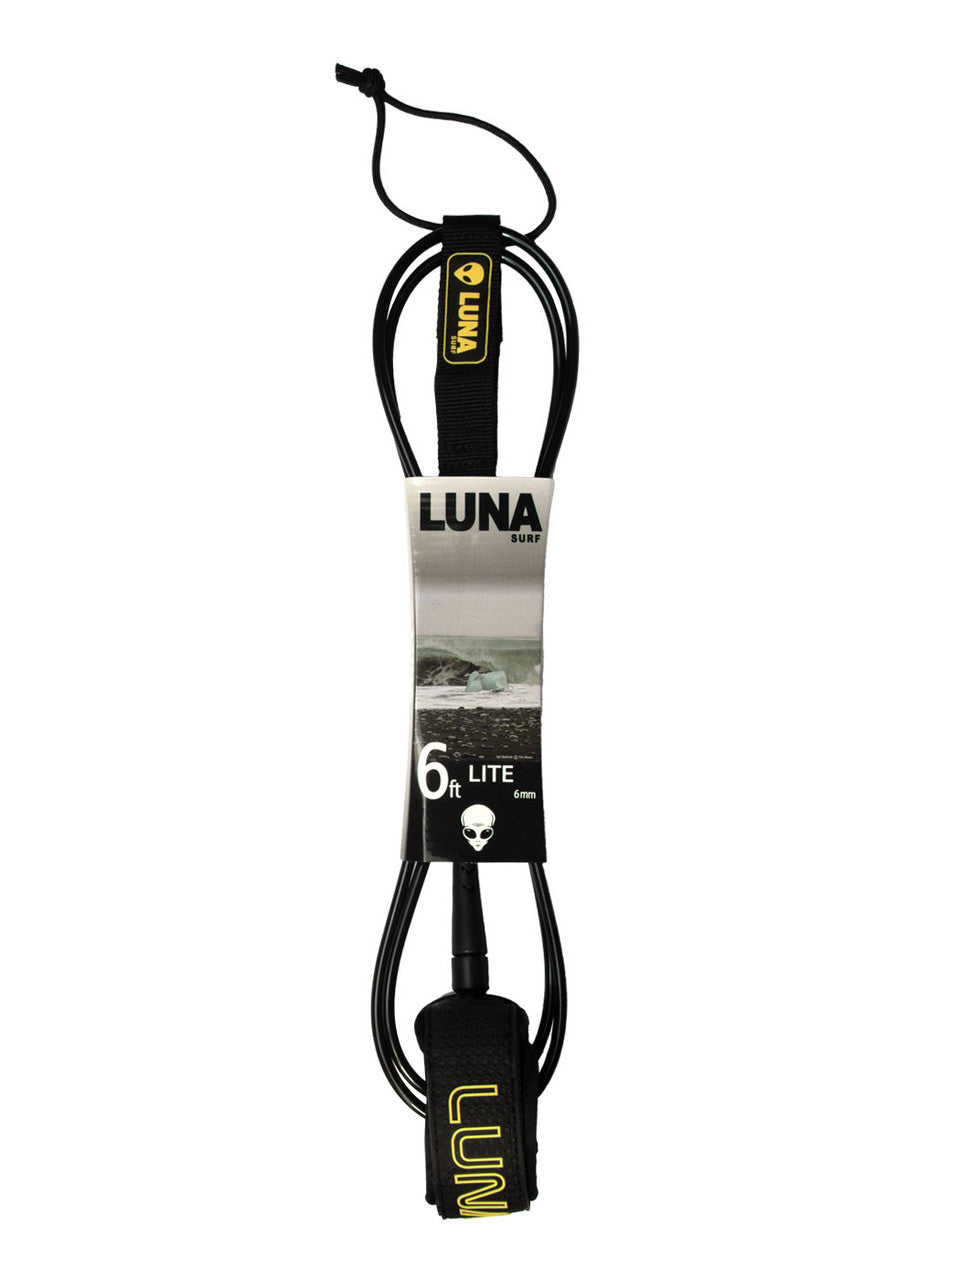 6ft surf leash with 6mm cord. Lite weight, slim cuff.